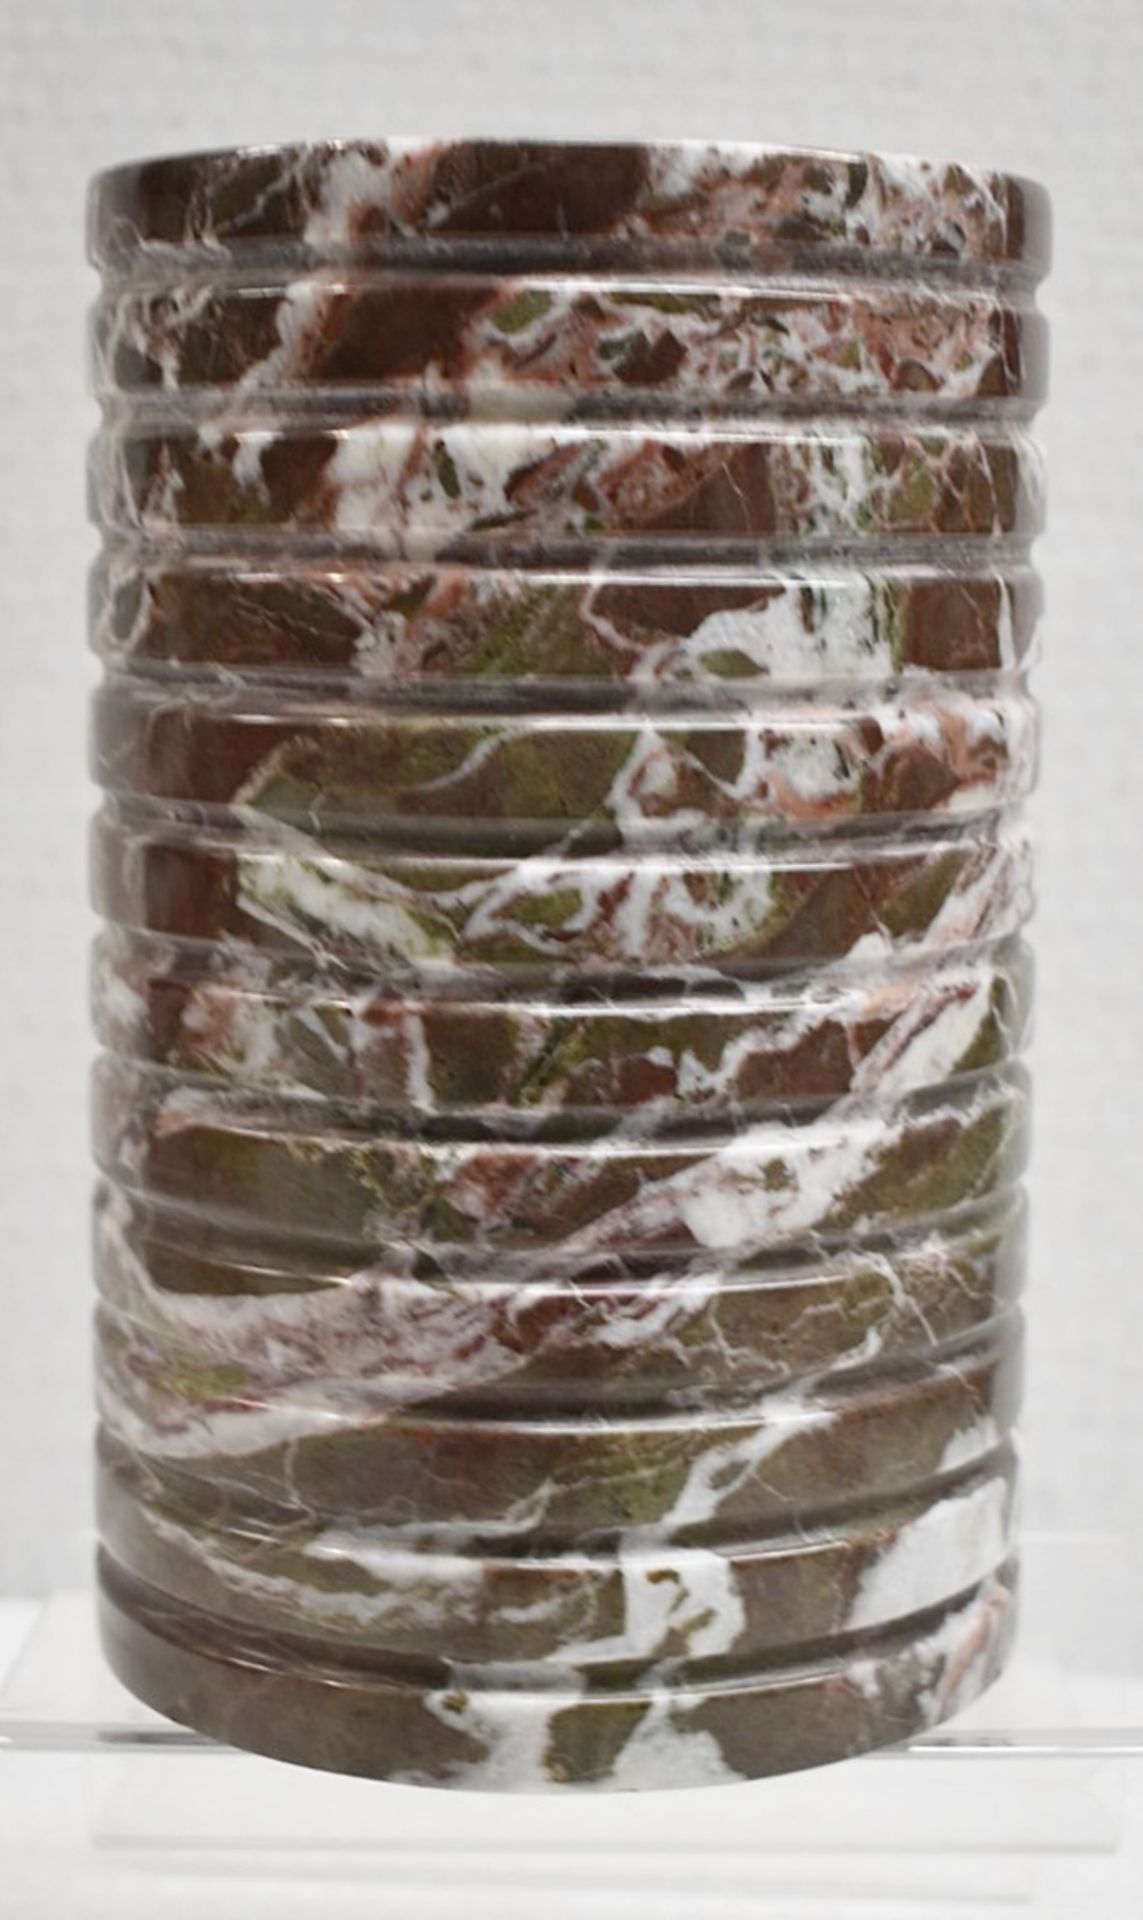 1 x SOHO HOUSE 'Pave' Red / Green Marble Wine Cooler - Original Price £110.00 - Unboxed Stock - Image 3 of 7